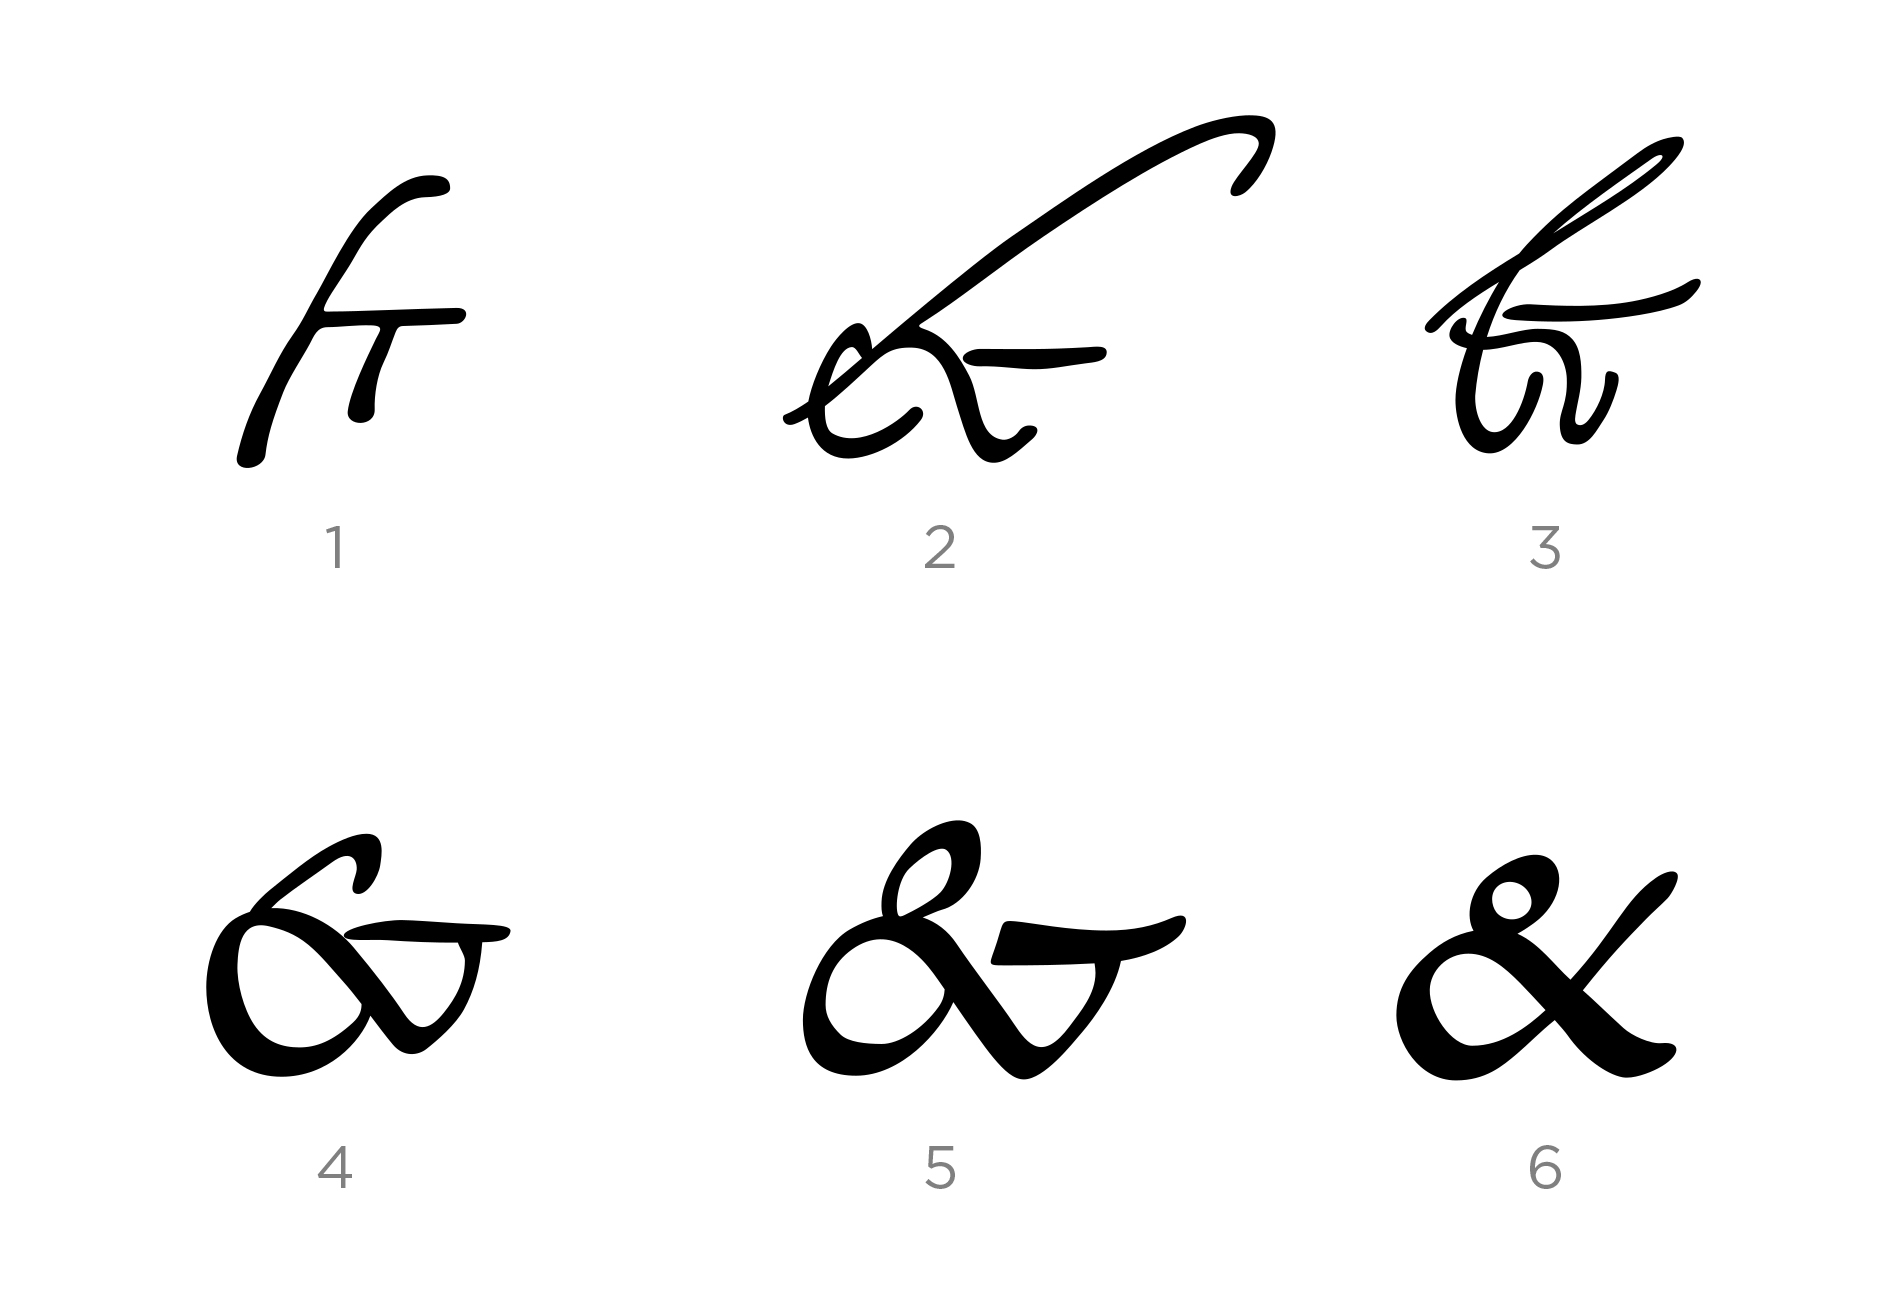 Ampersand through the years